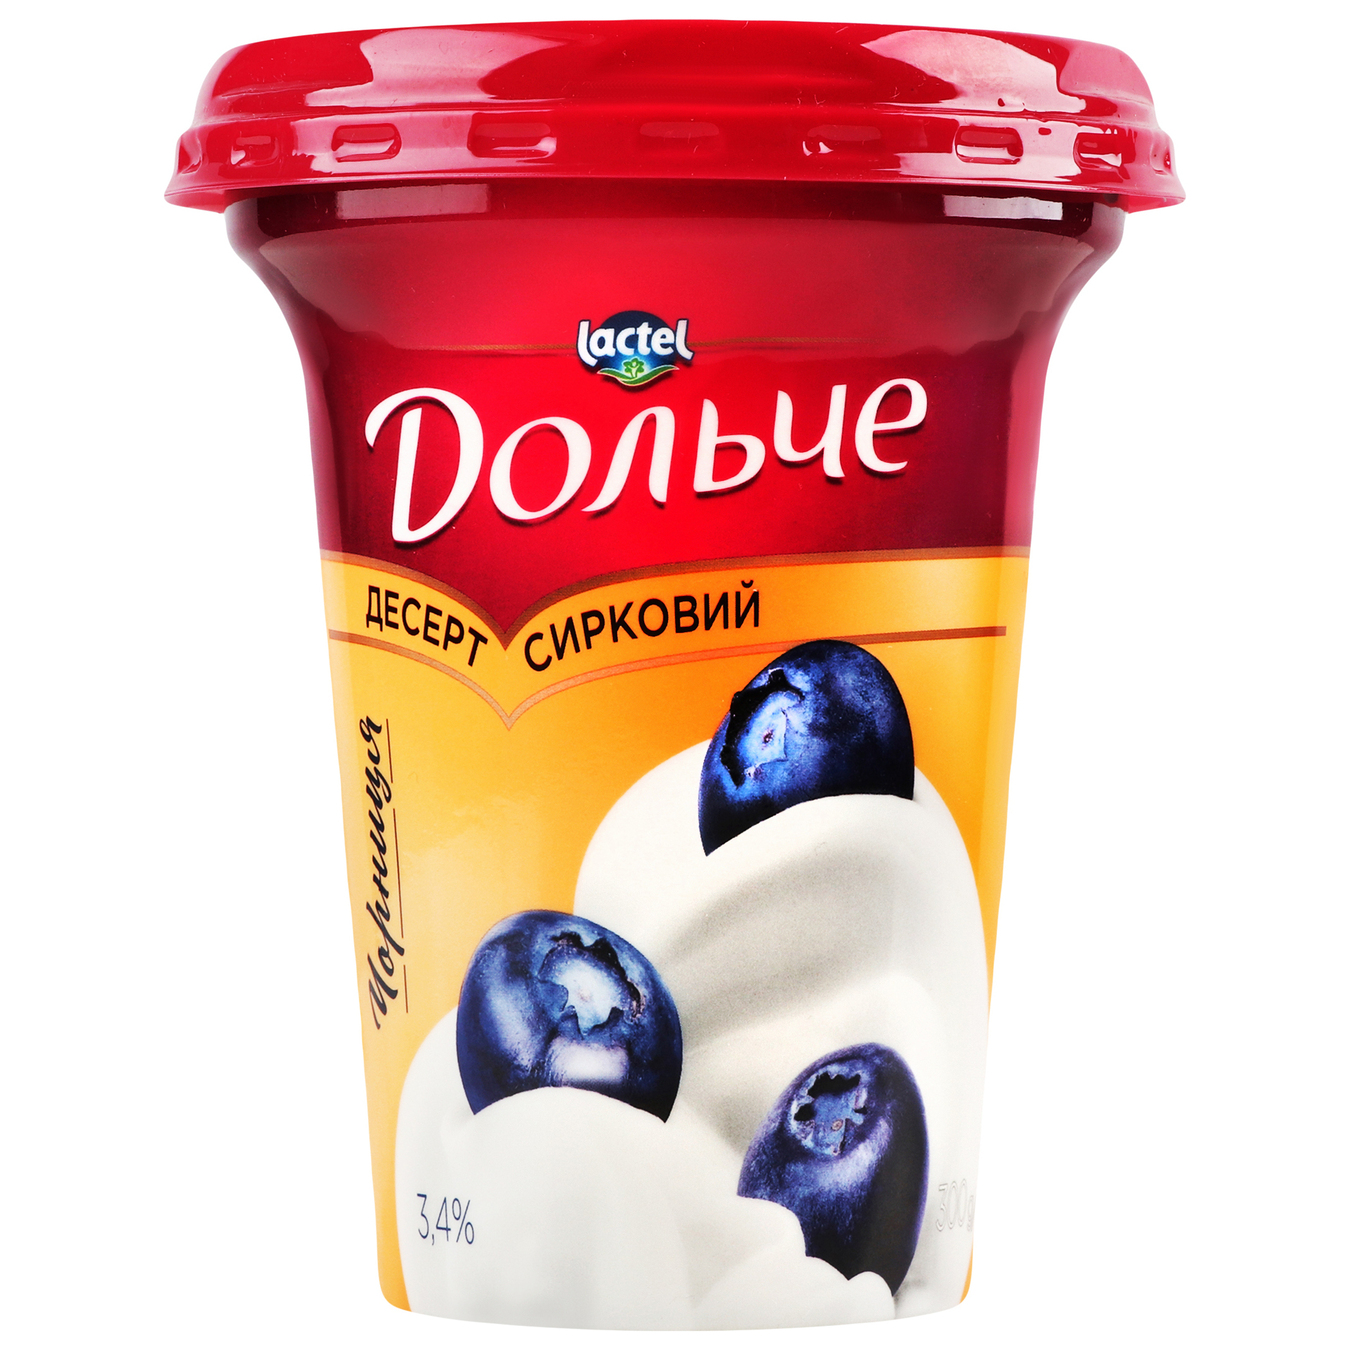 Cheese dessert Dolce with blueberry filling 3.4% 300g